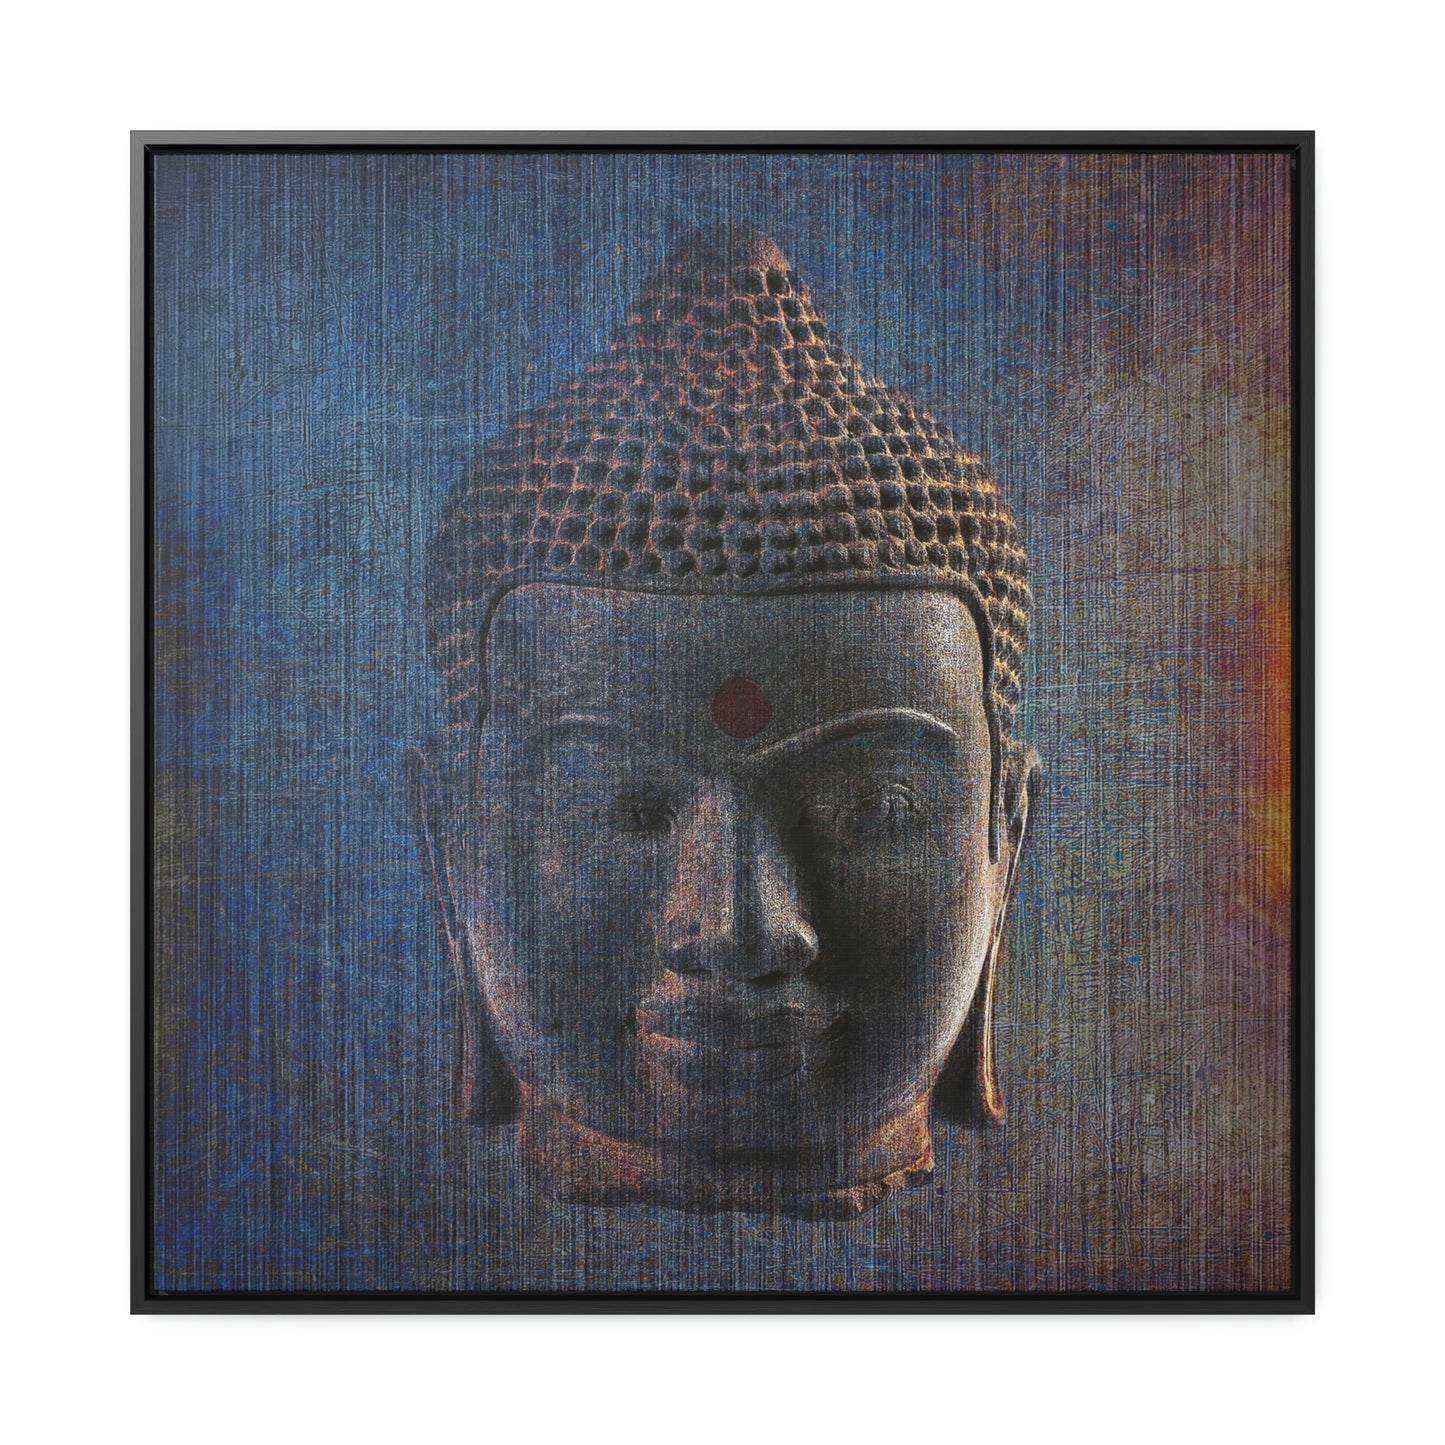 Modern Art - Distressed Blue Buddha Head Print on Square Canvas in a Floating Frame